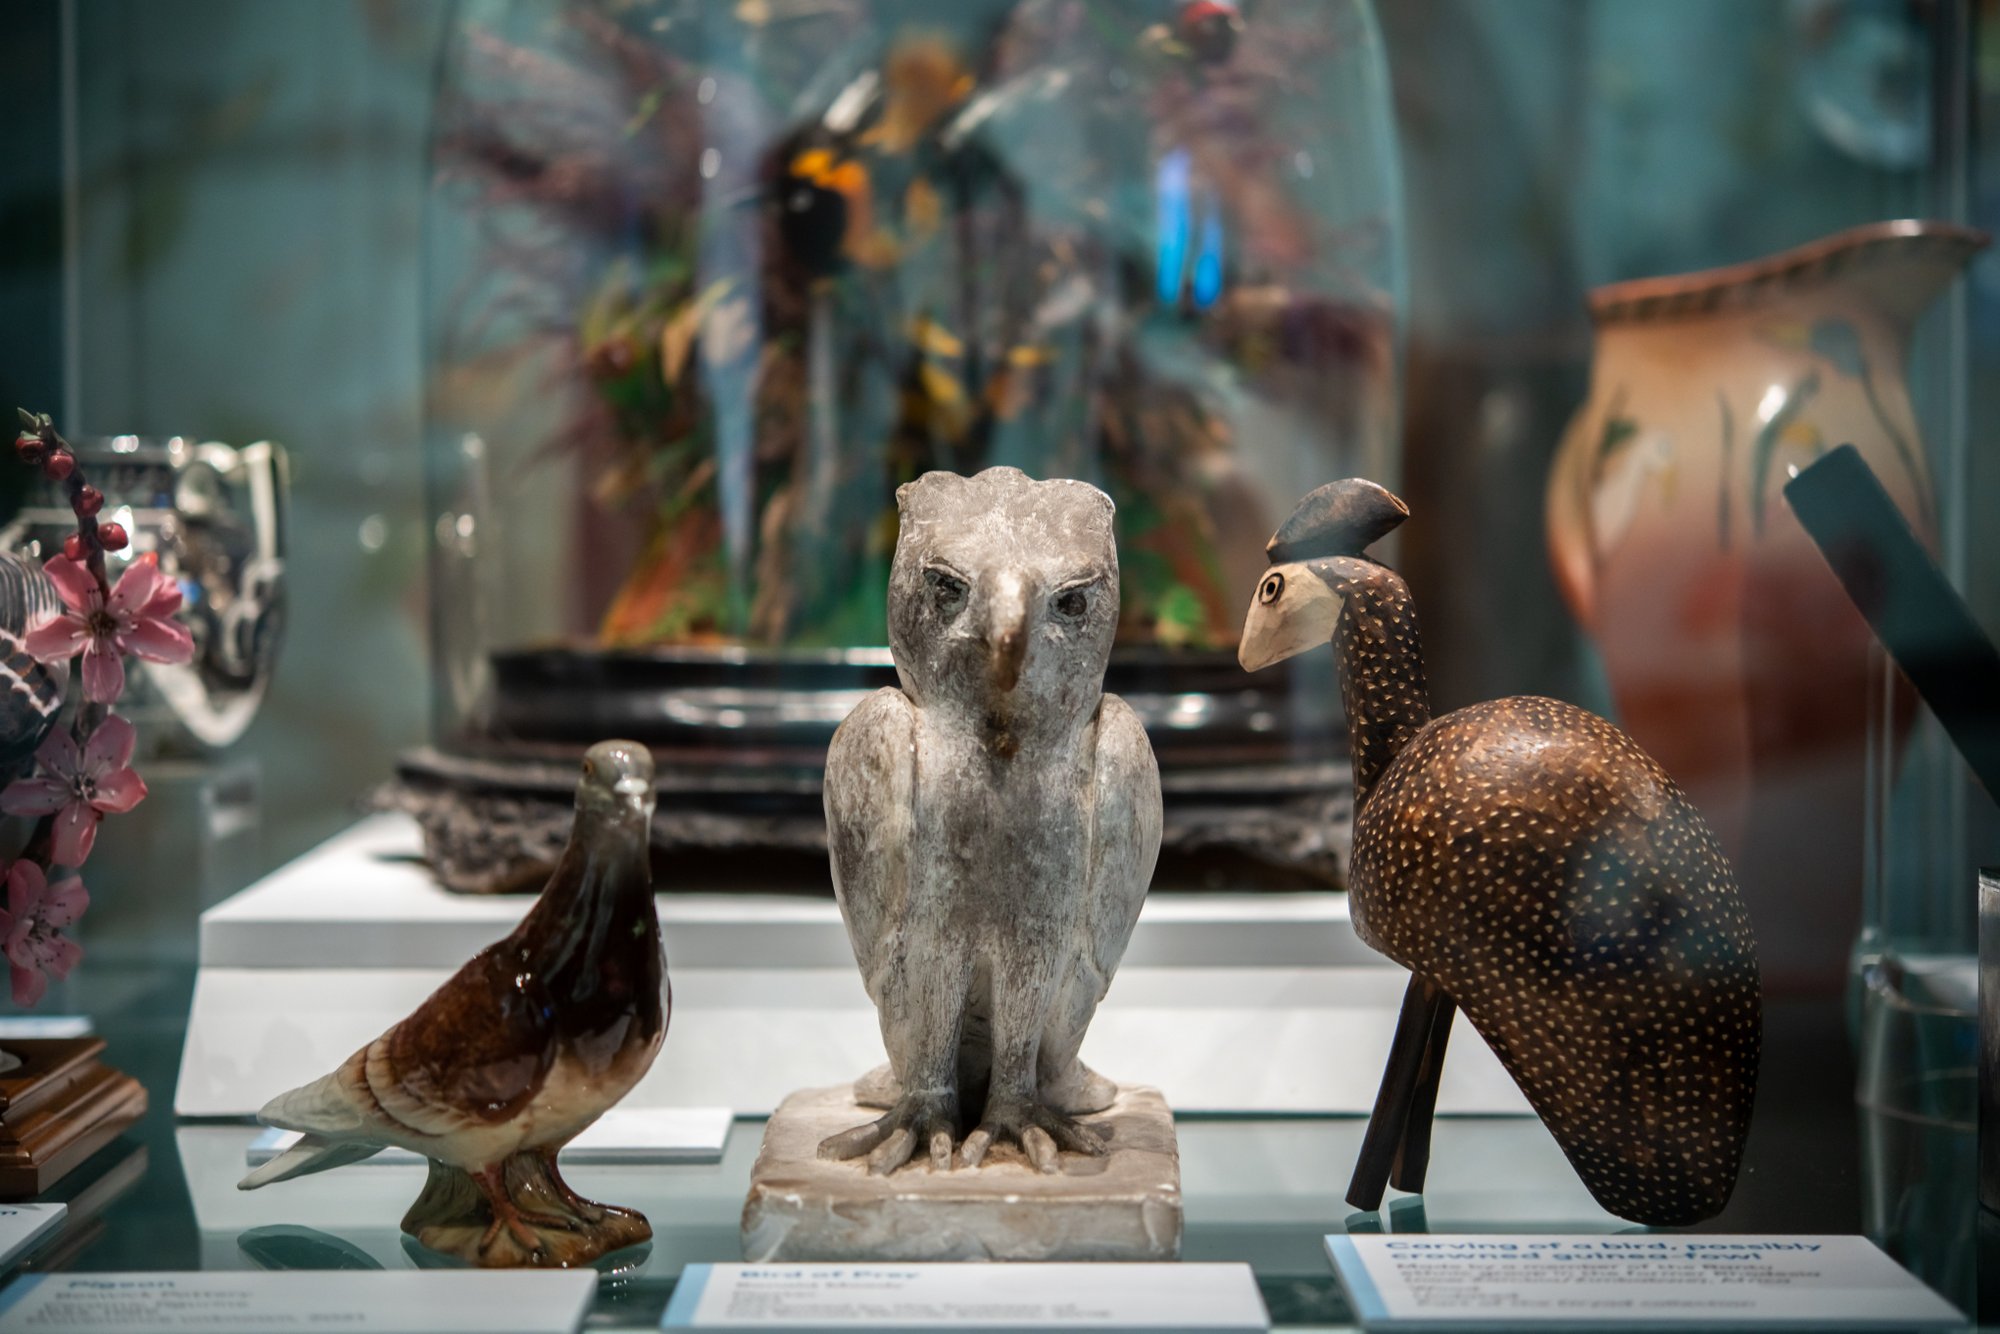 A case containing inspirational bird objects from the museum's collections, which accompanied the artwork display